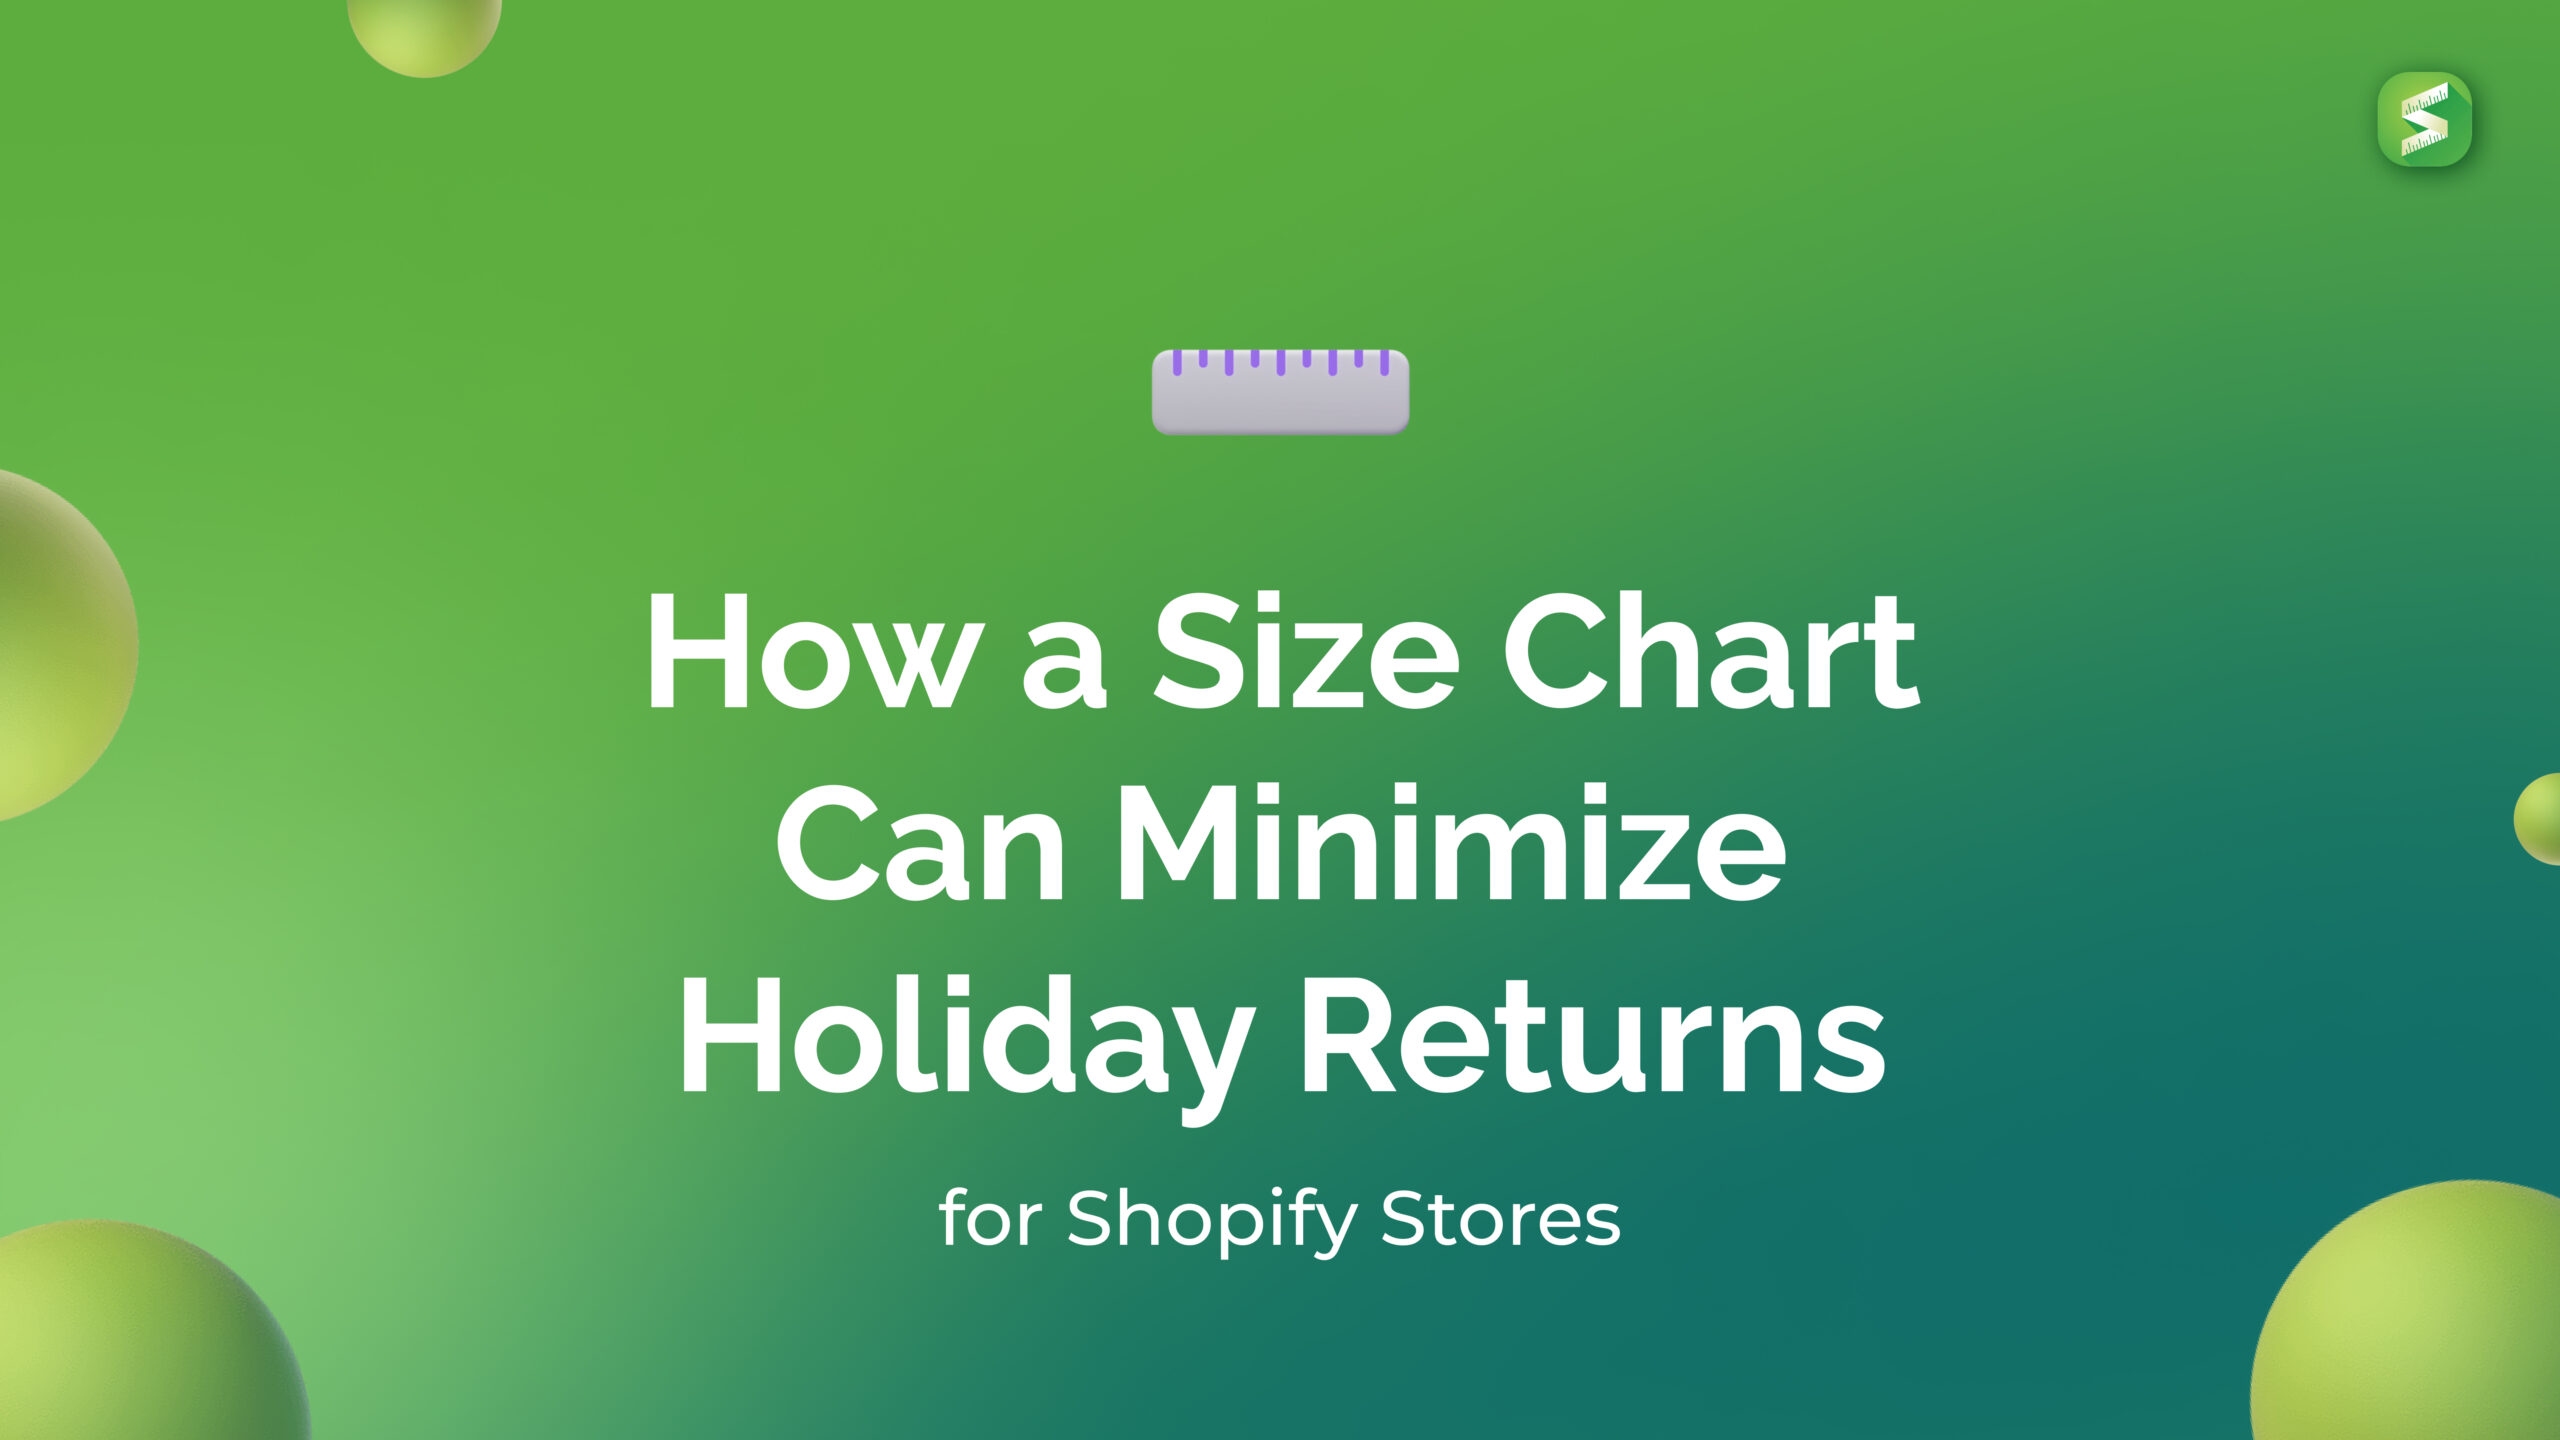 How a Size Chart Can Minimize Holiday Returns for Shopify Stores